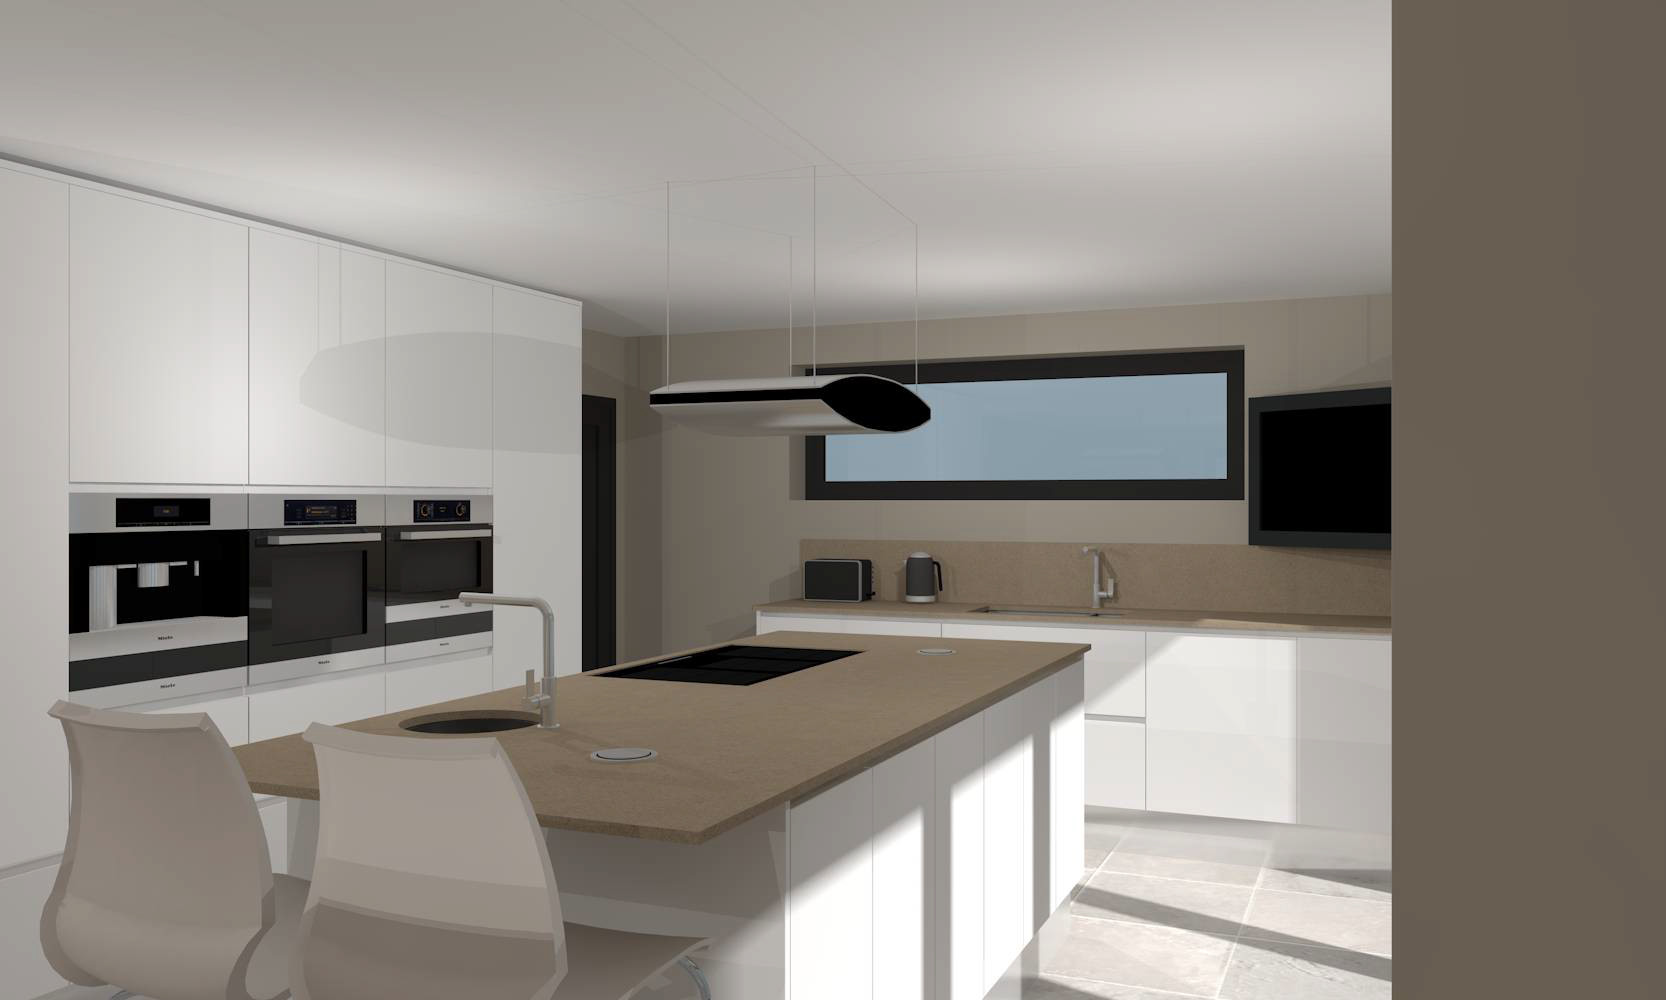 kitchen design distance learning